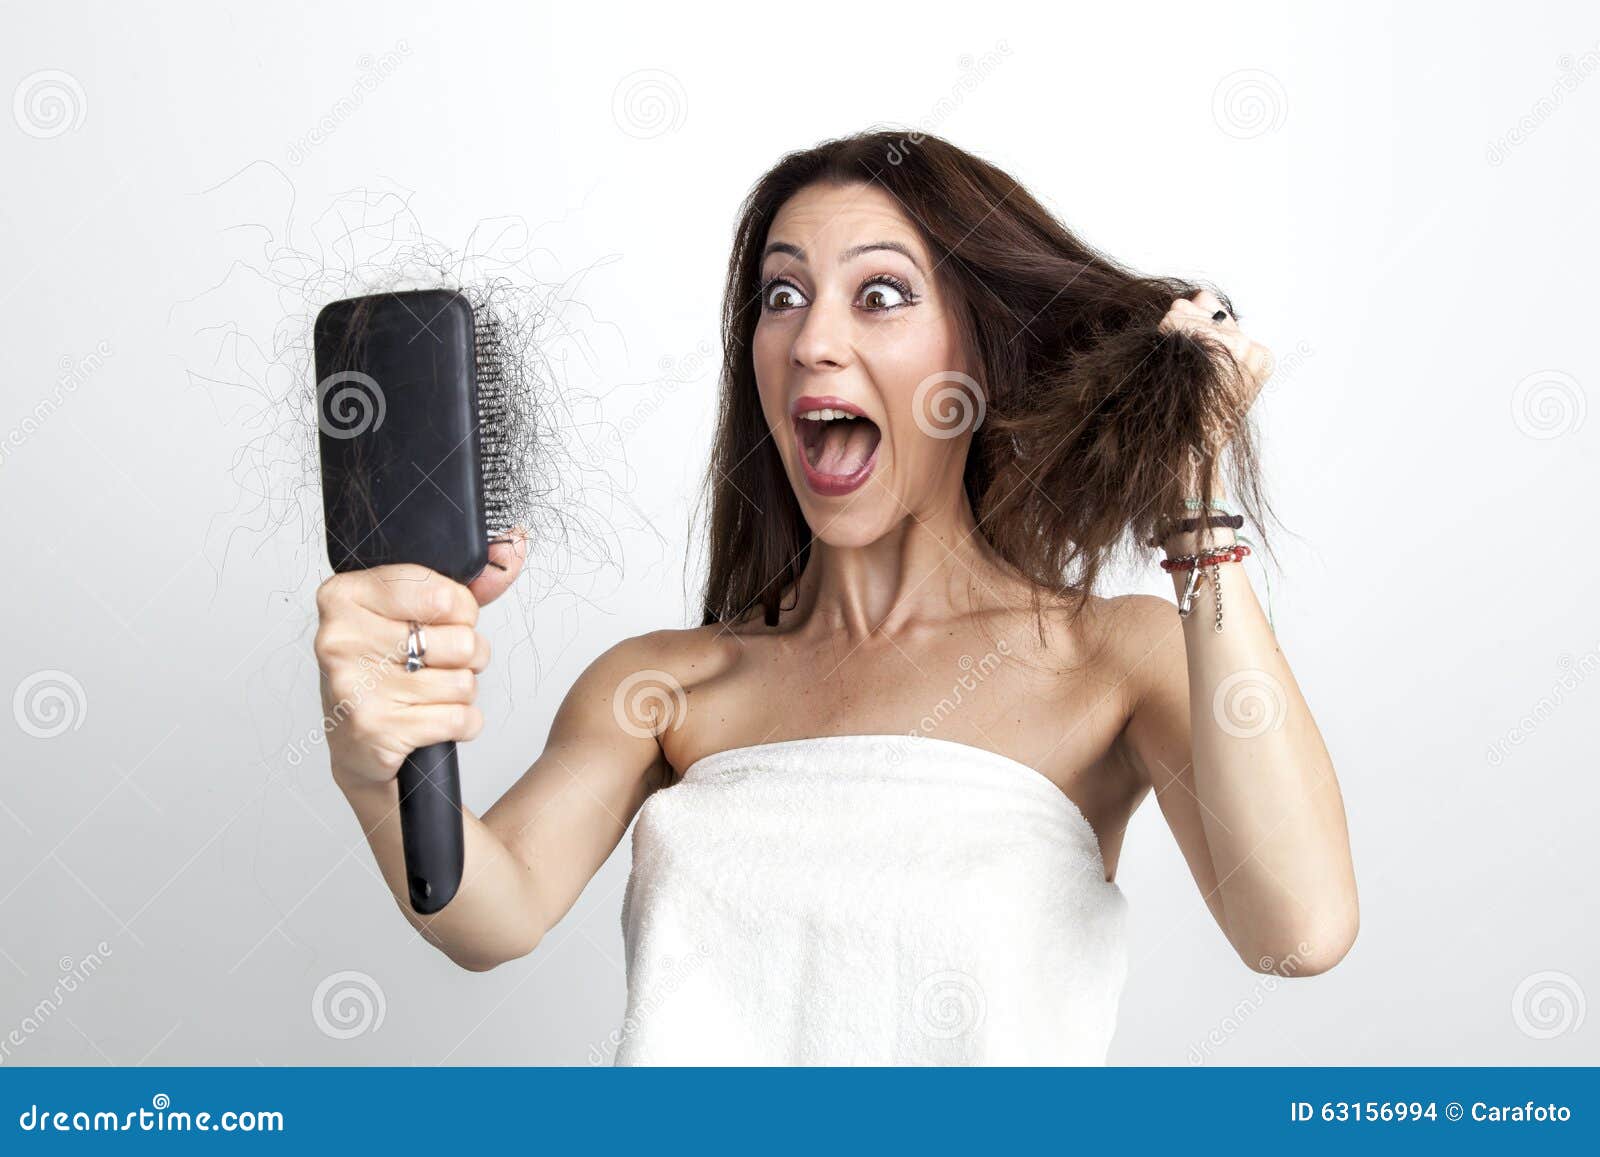 attractive woman with hair loss